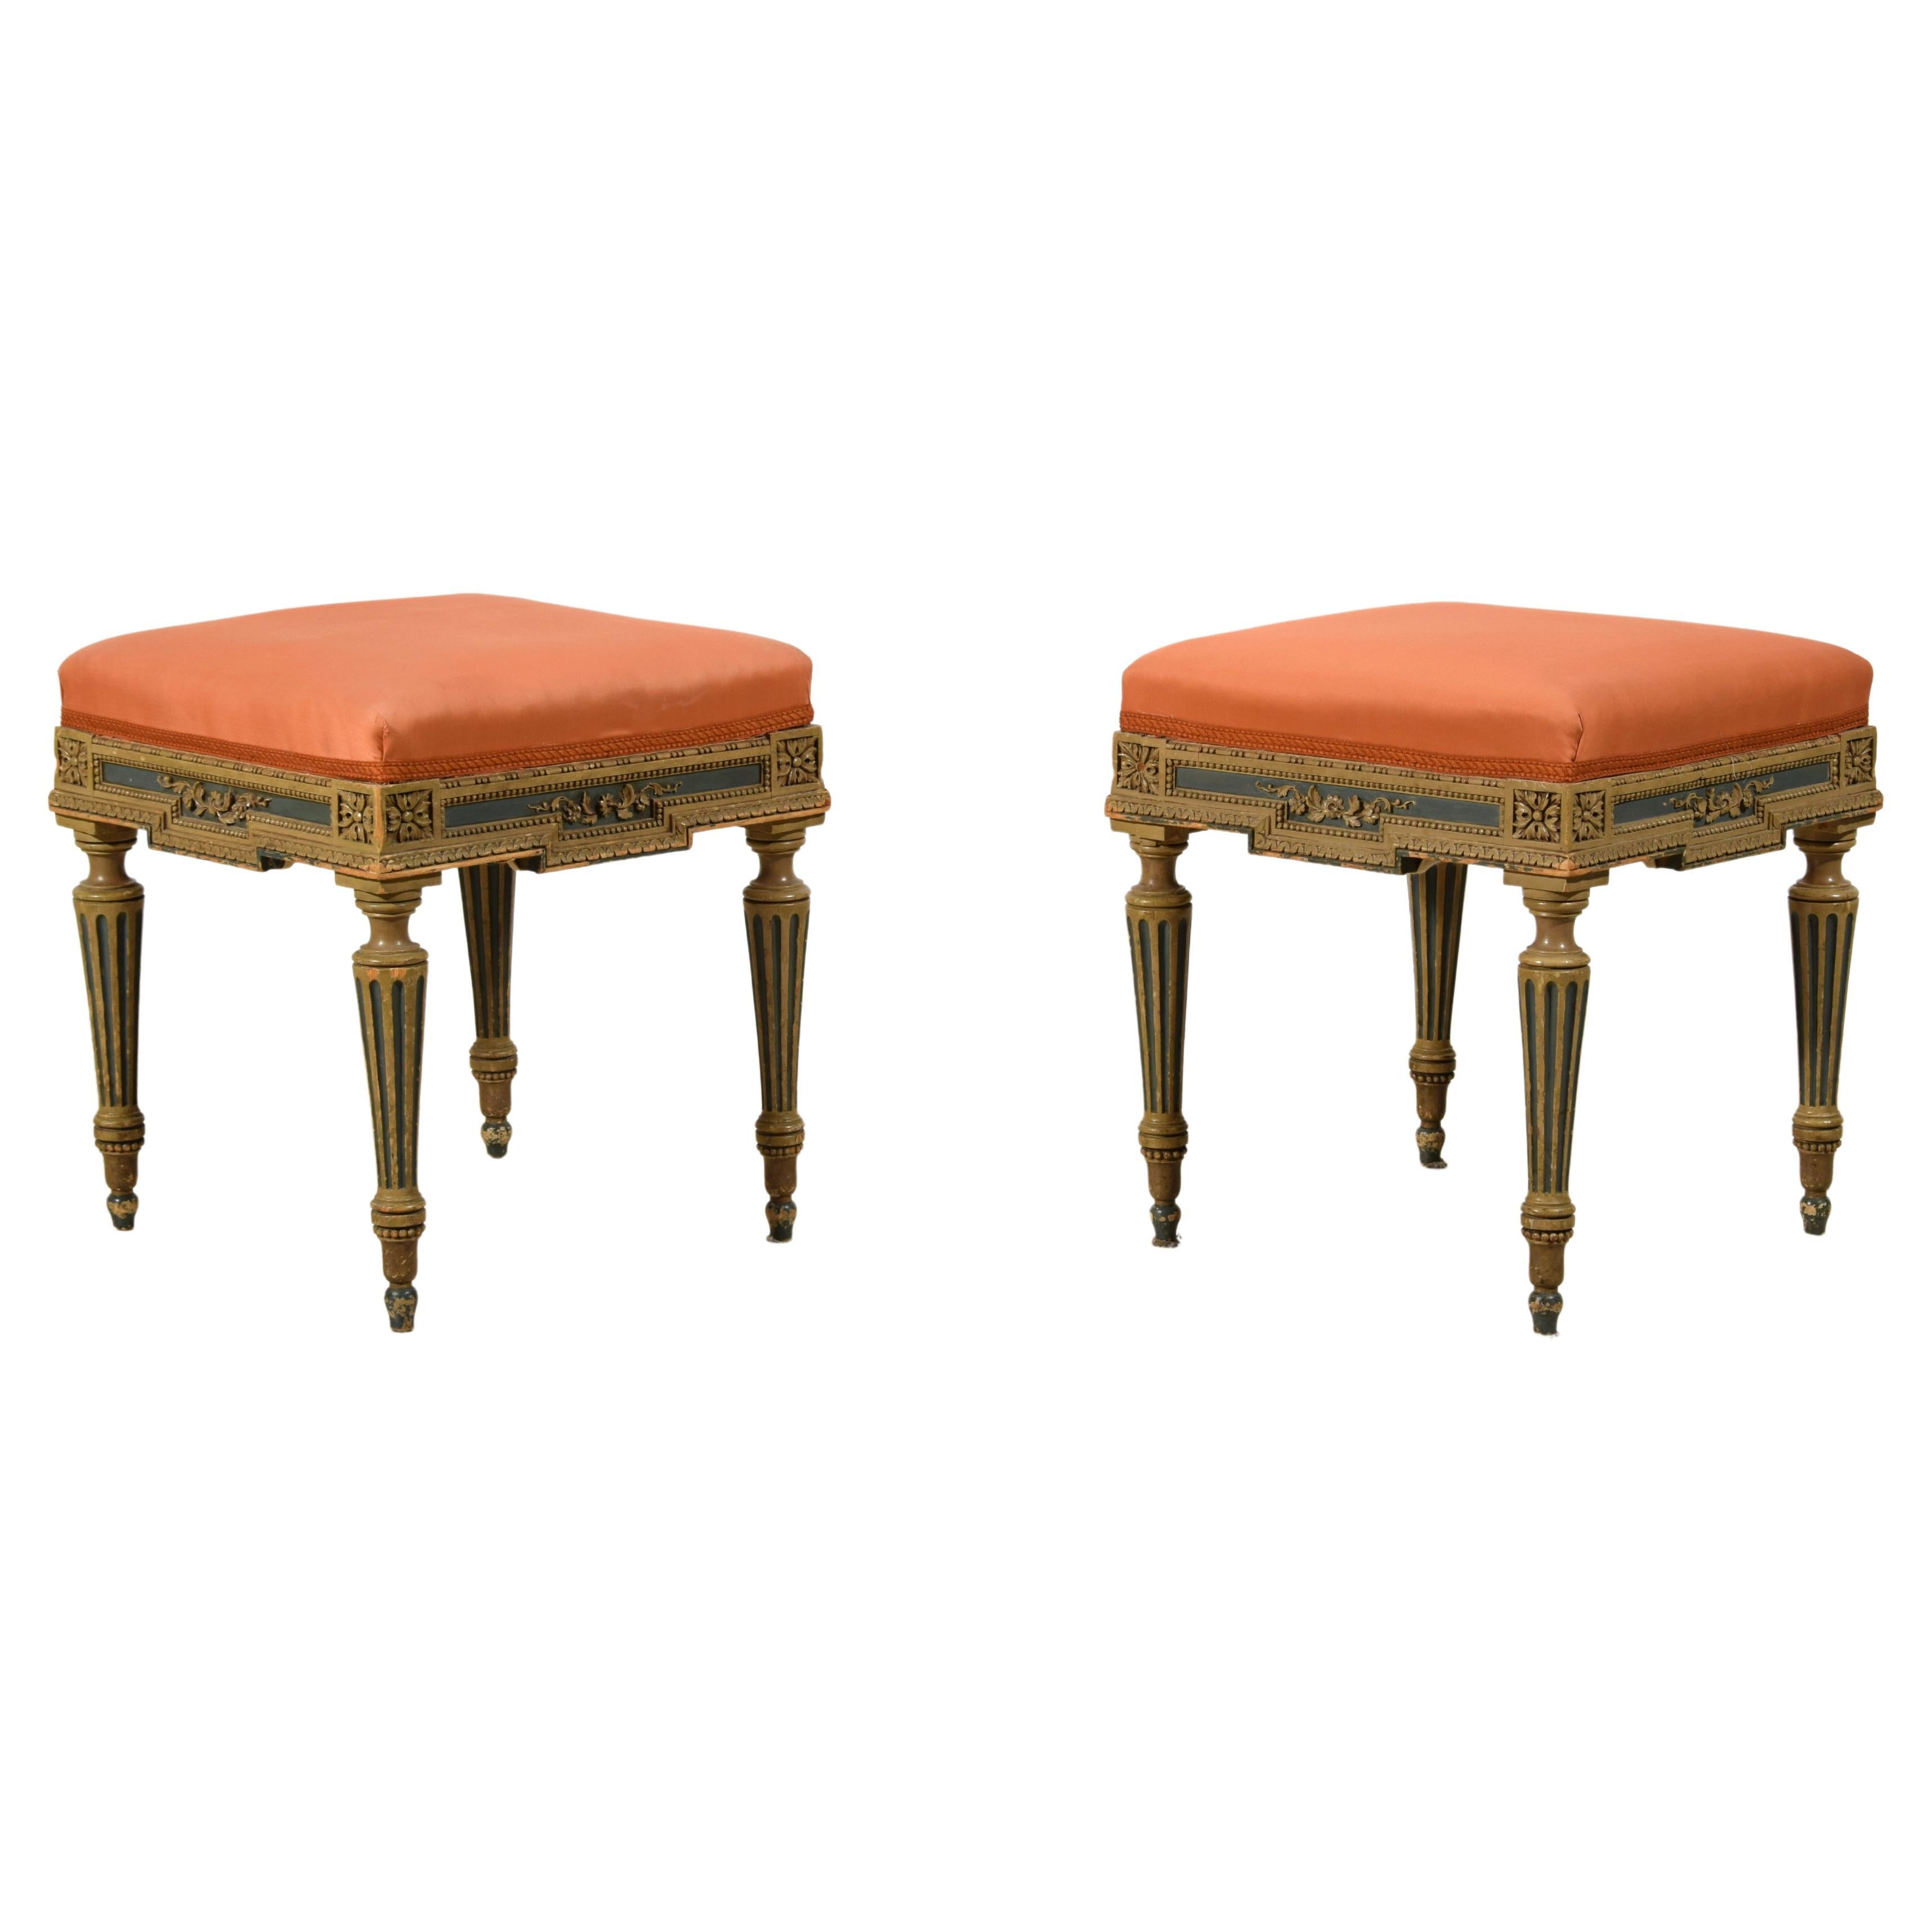 XXth Century, Pair of Italian Neoclassical Style Lacquered Wood Stools For Sale